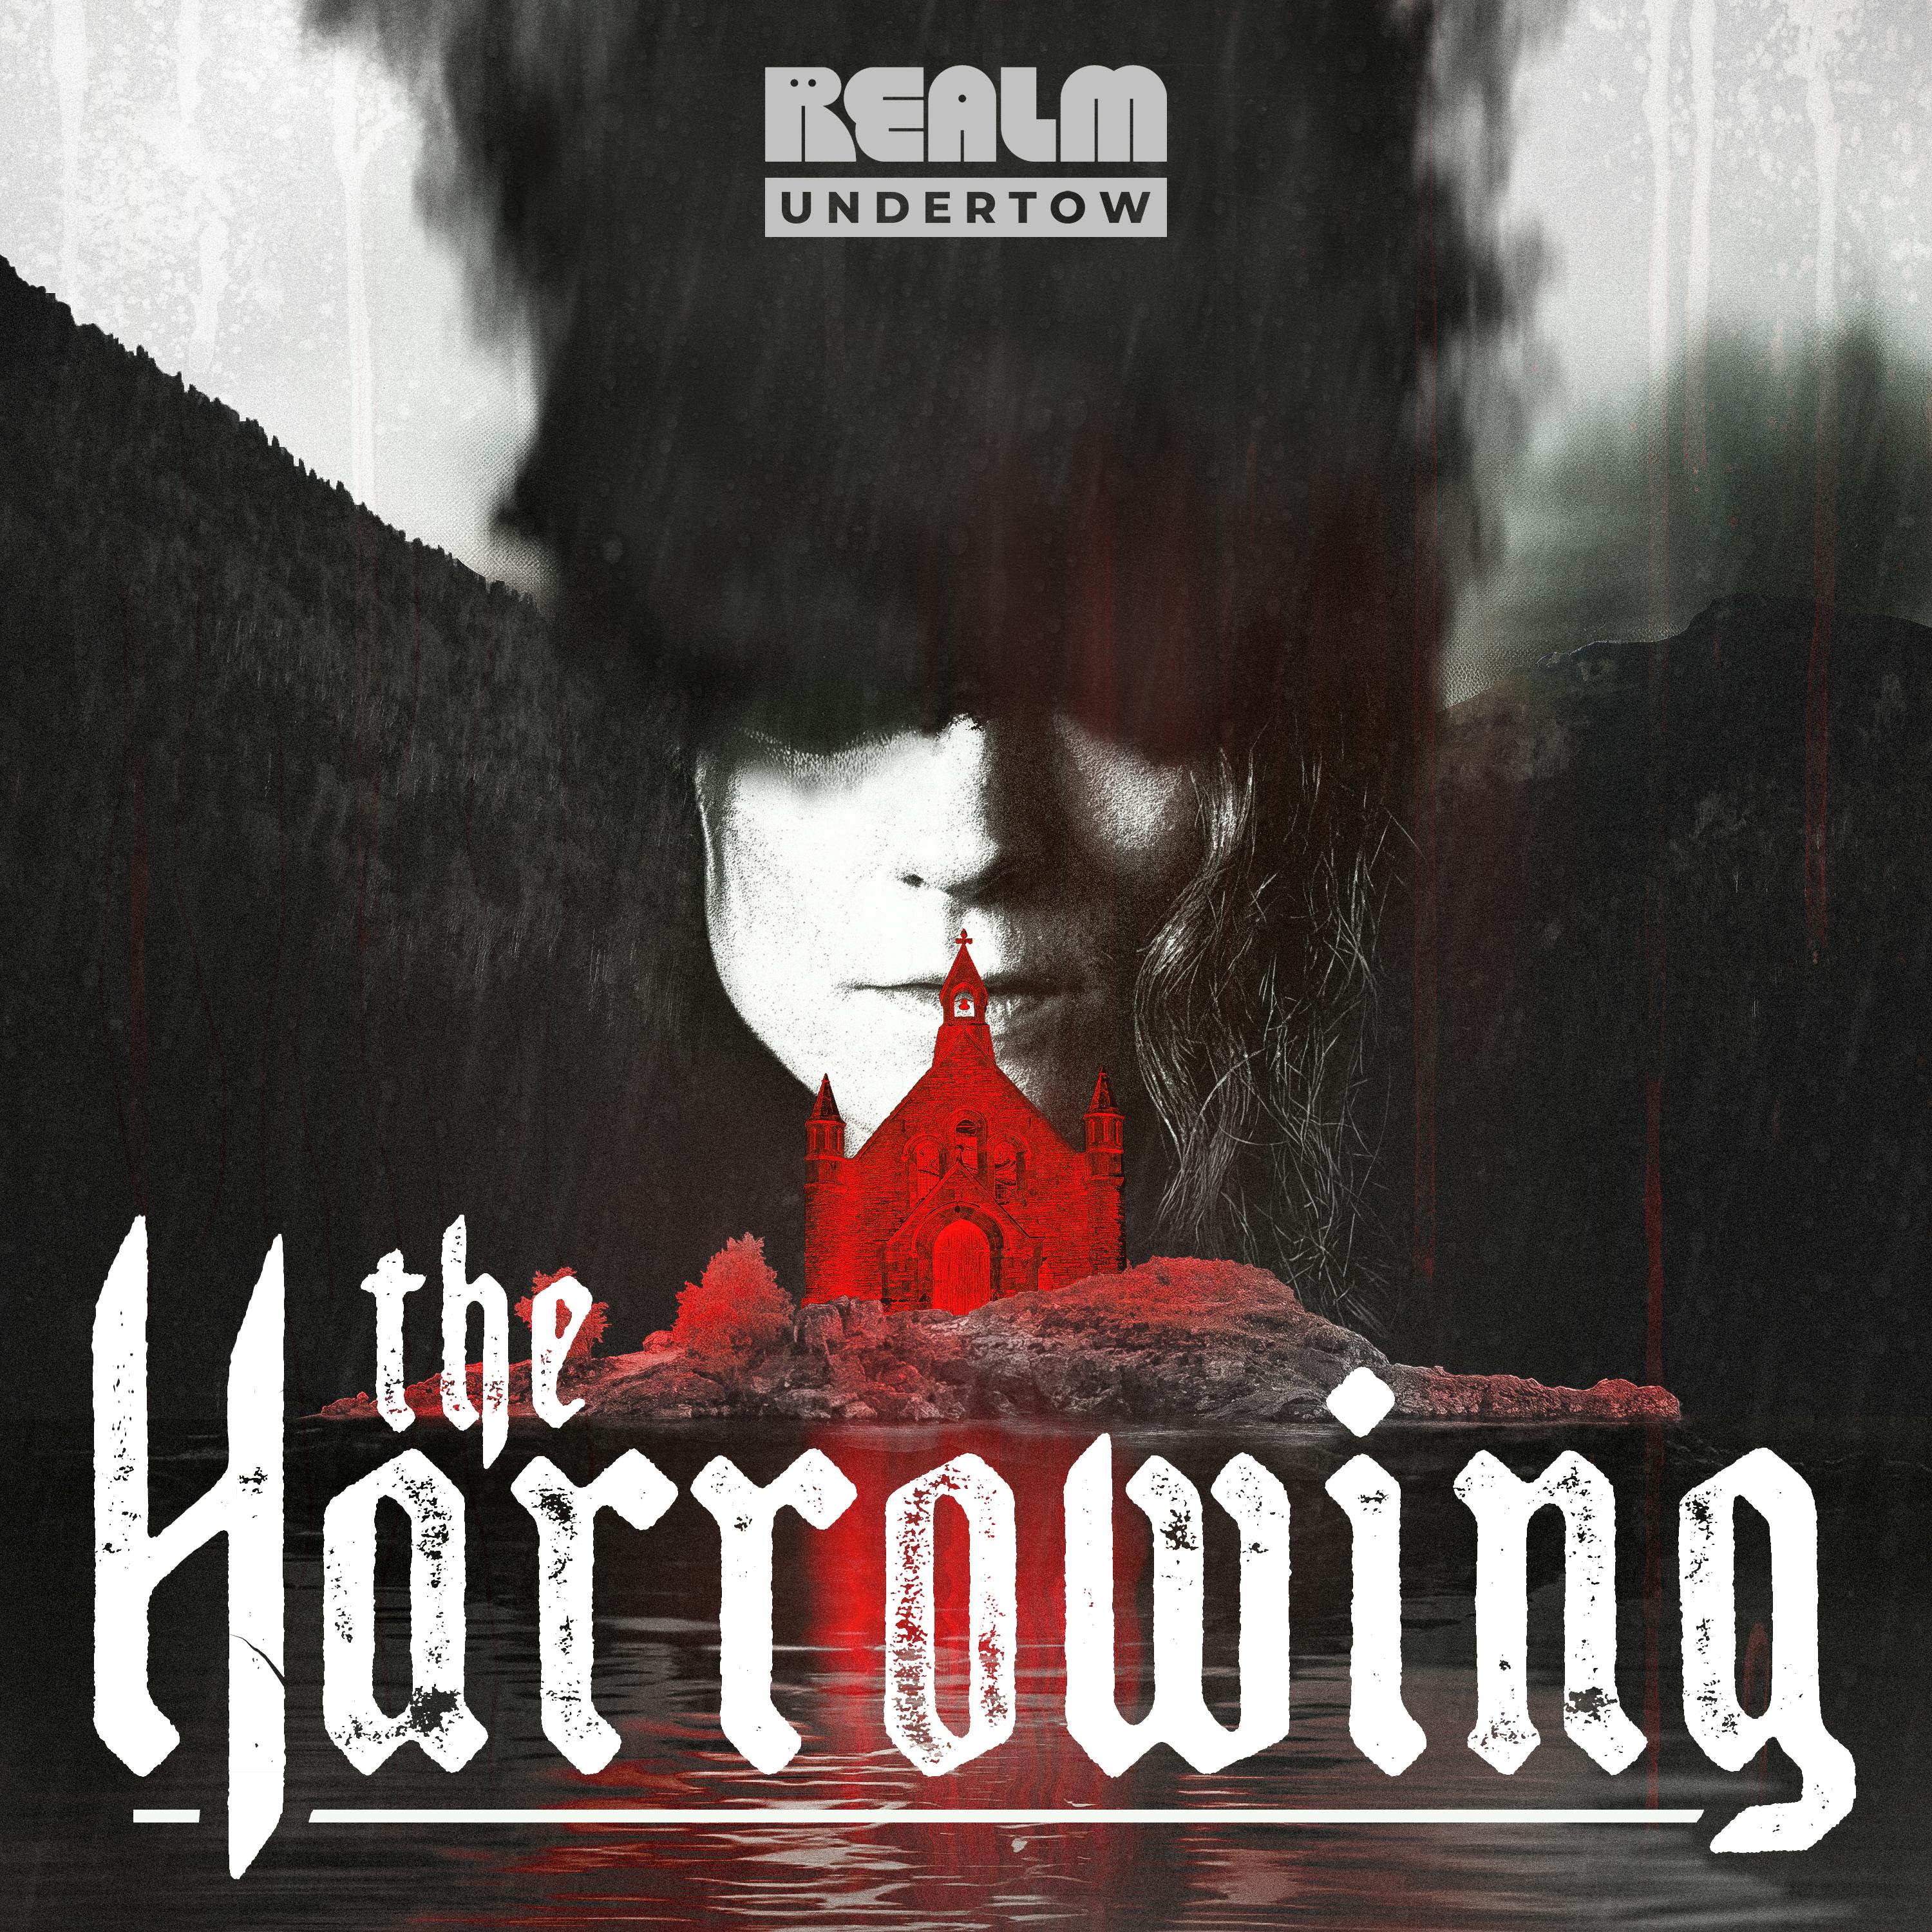 Undertow: The Harrowing (Realm Unlimited) podcast tile